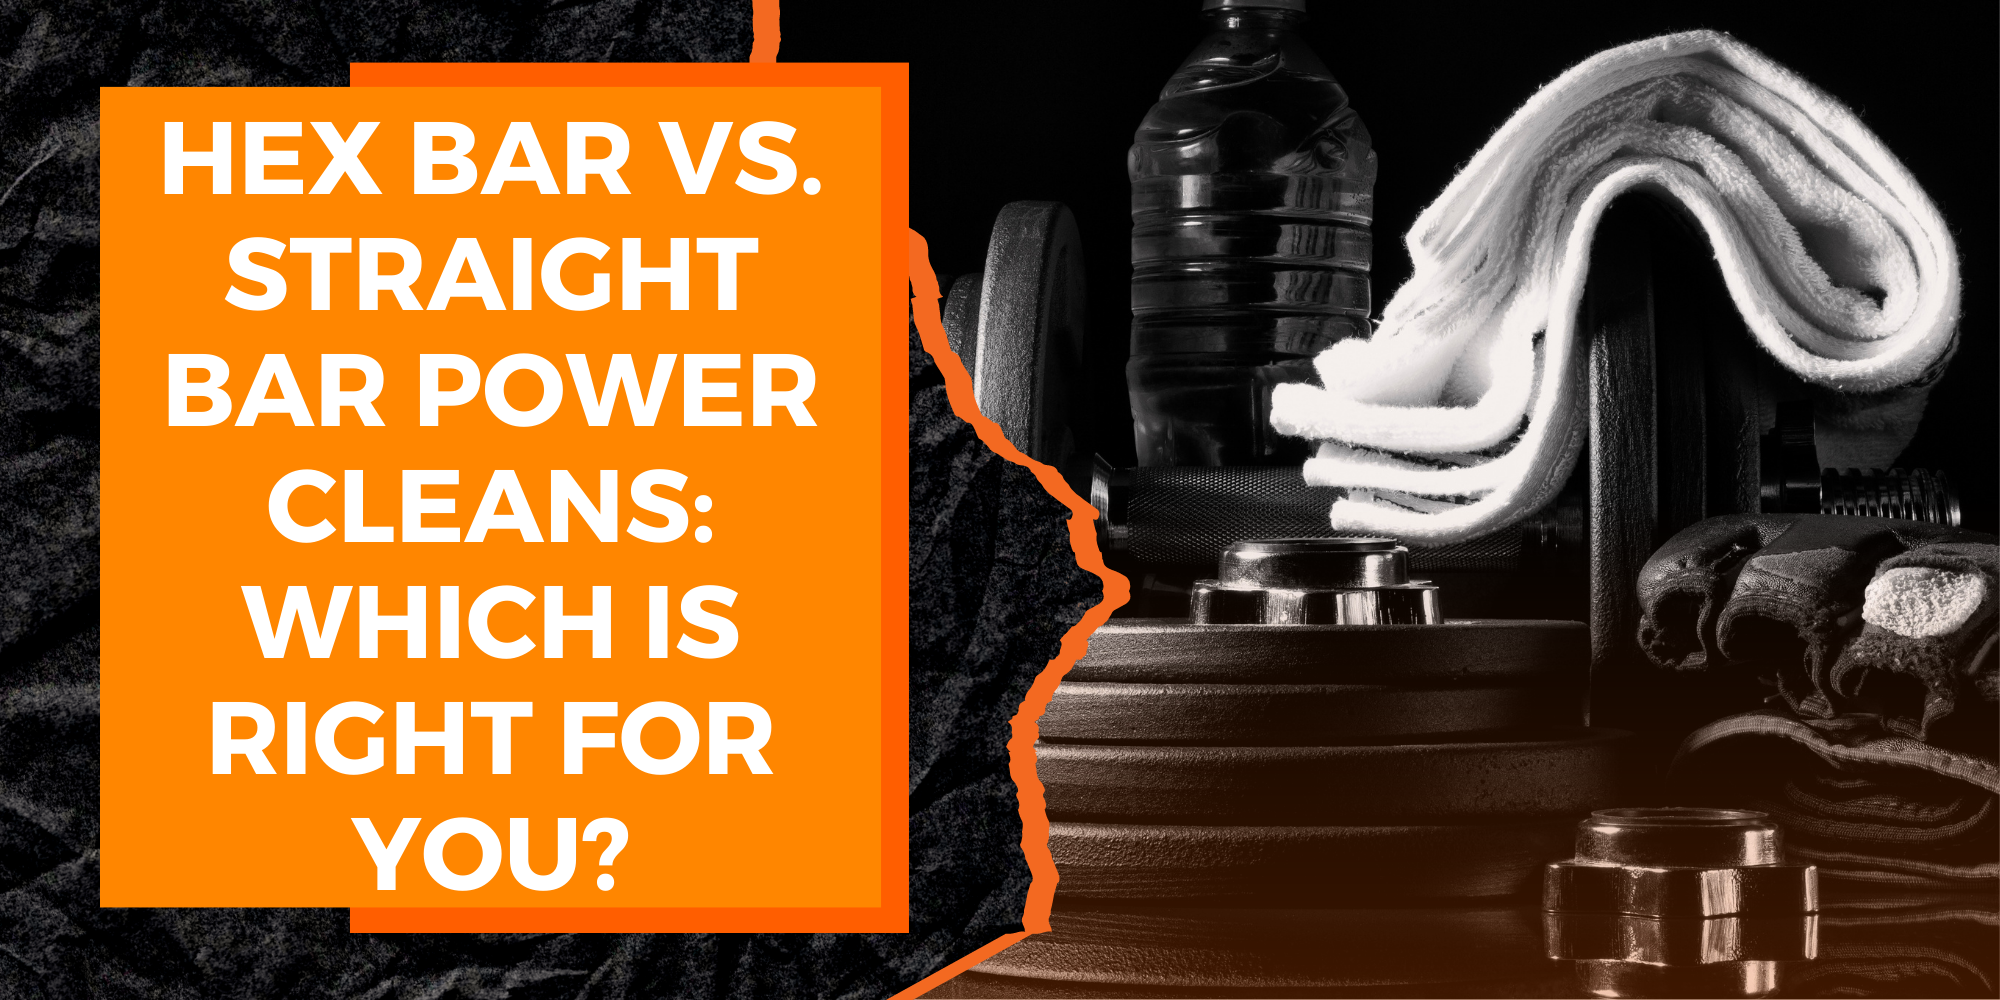 Hex Bar vs. Straight Bar Power Cleans: Which is Right for You?